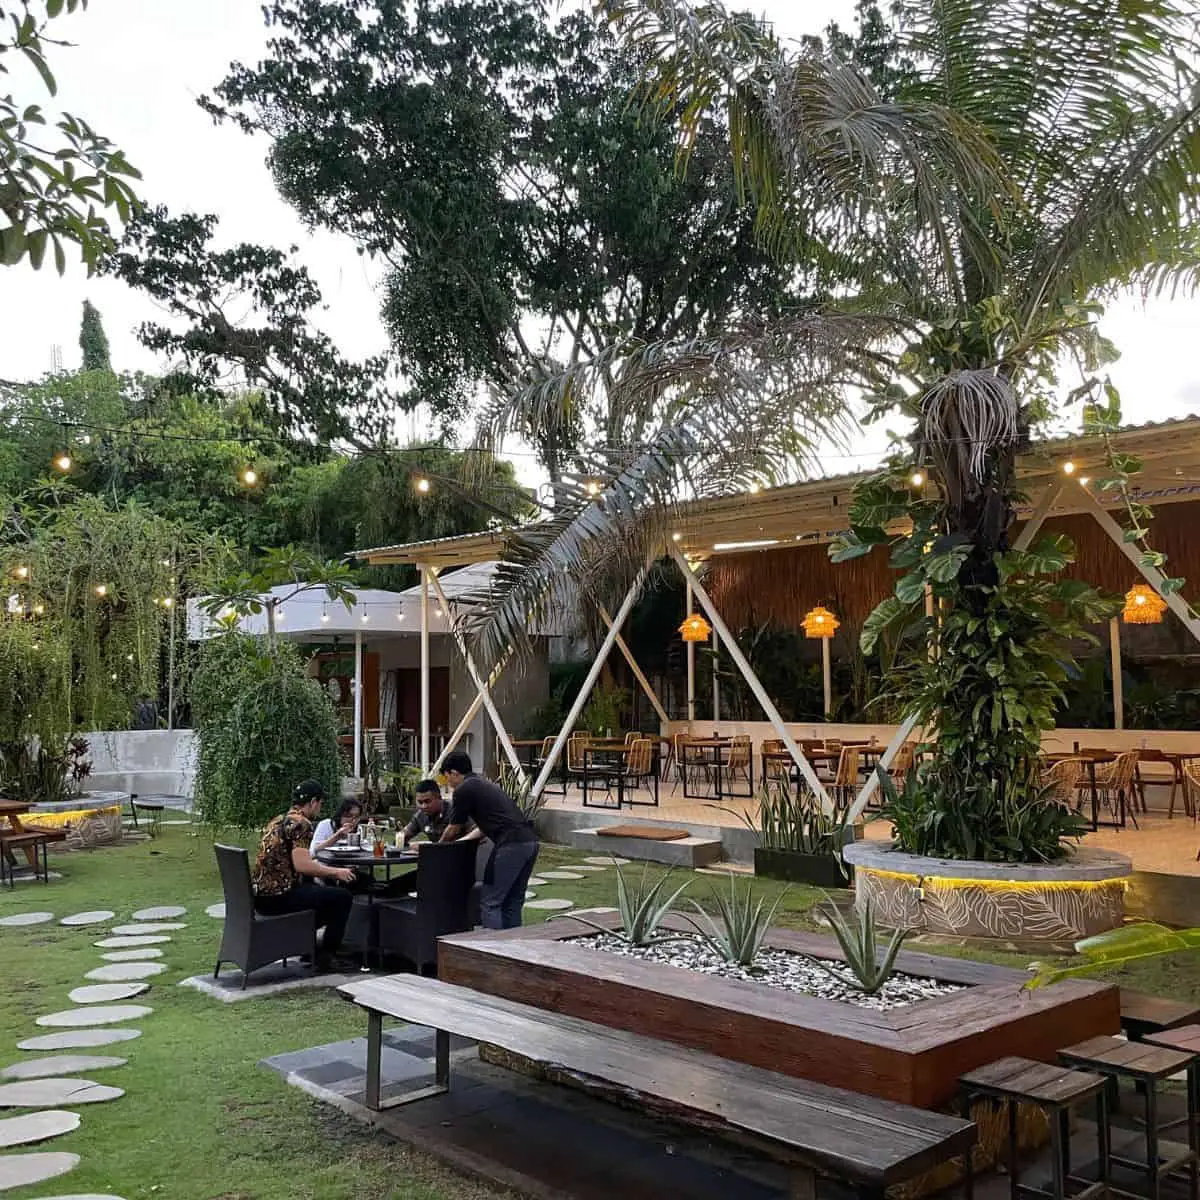 Best cafe in Kuta Bali Mantra Coffee and Eatery